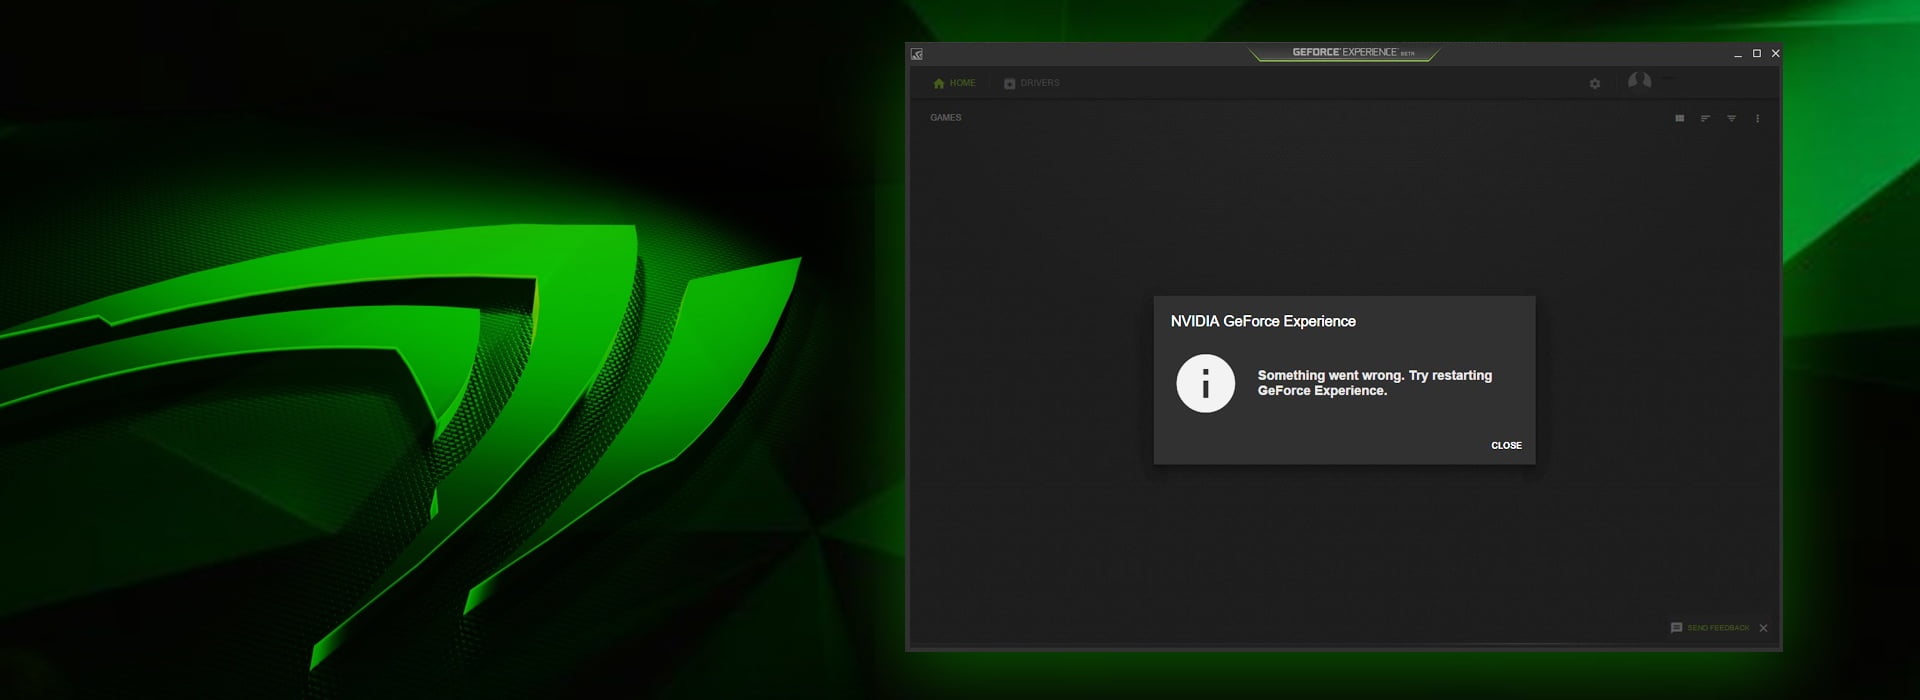 Fix For Nvidia Geforce Experience Error Code 0x0001 Its Time To